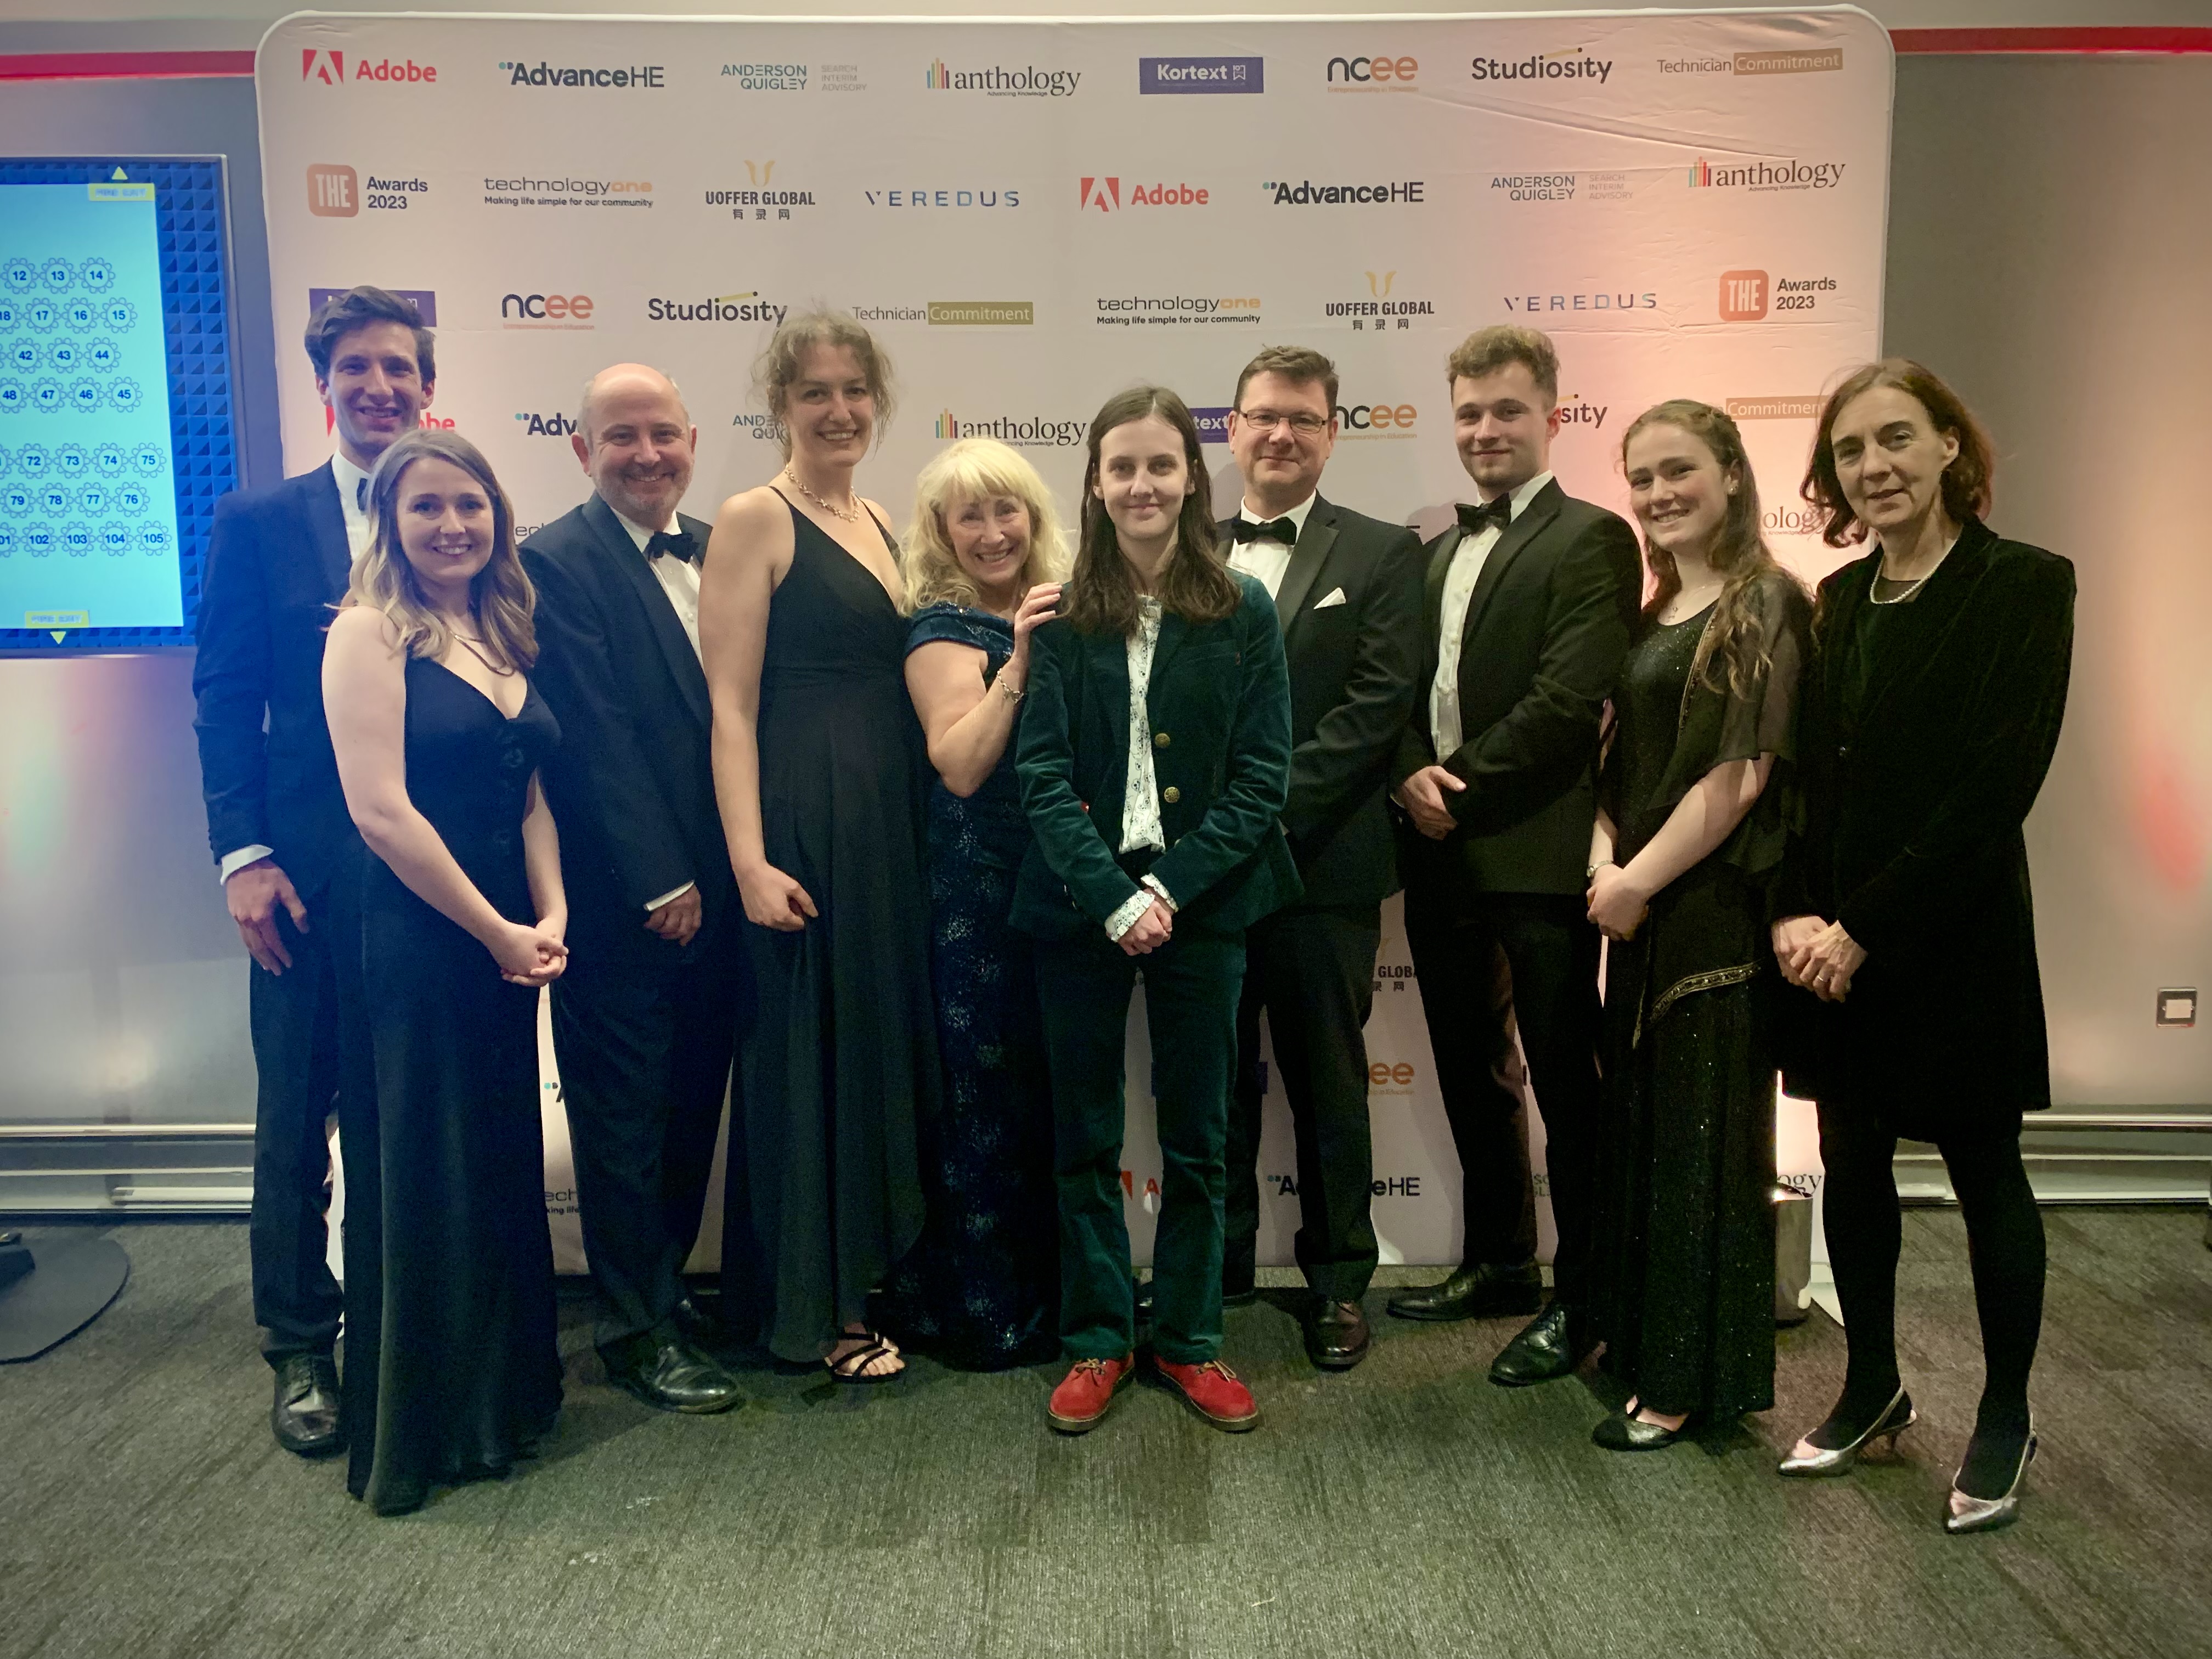 Group photo of 10 smiling people in black tie standing in front of a board featuring different company logos.